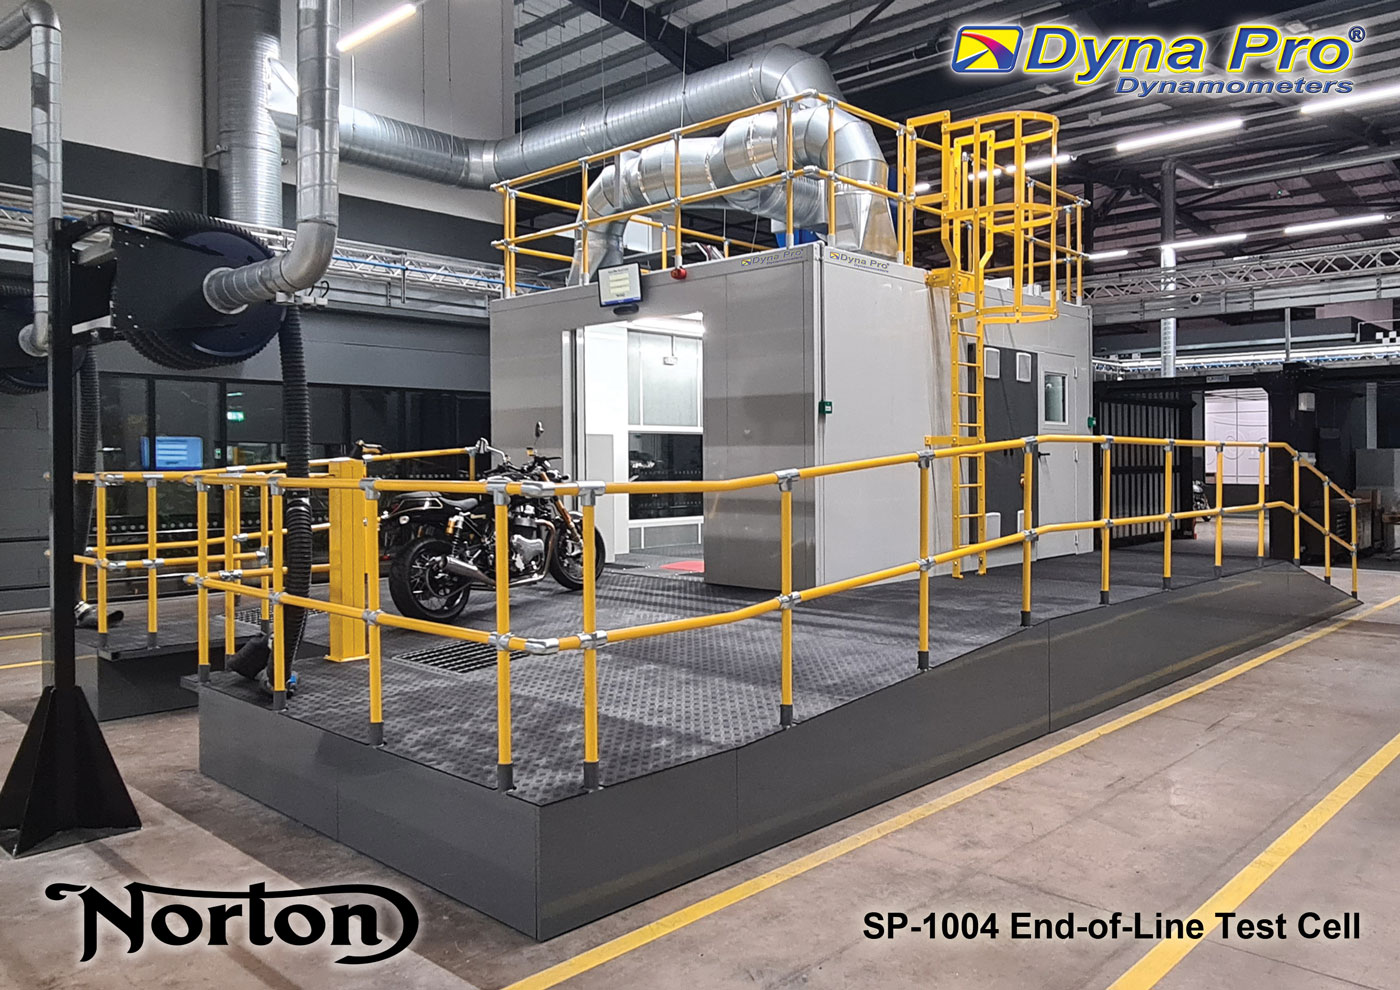 Norton Motorcycles End-of-Line Test Cell manufactured by Dyna Pro Dynamometer